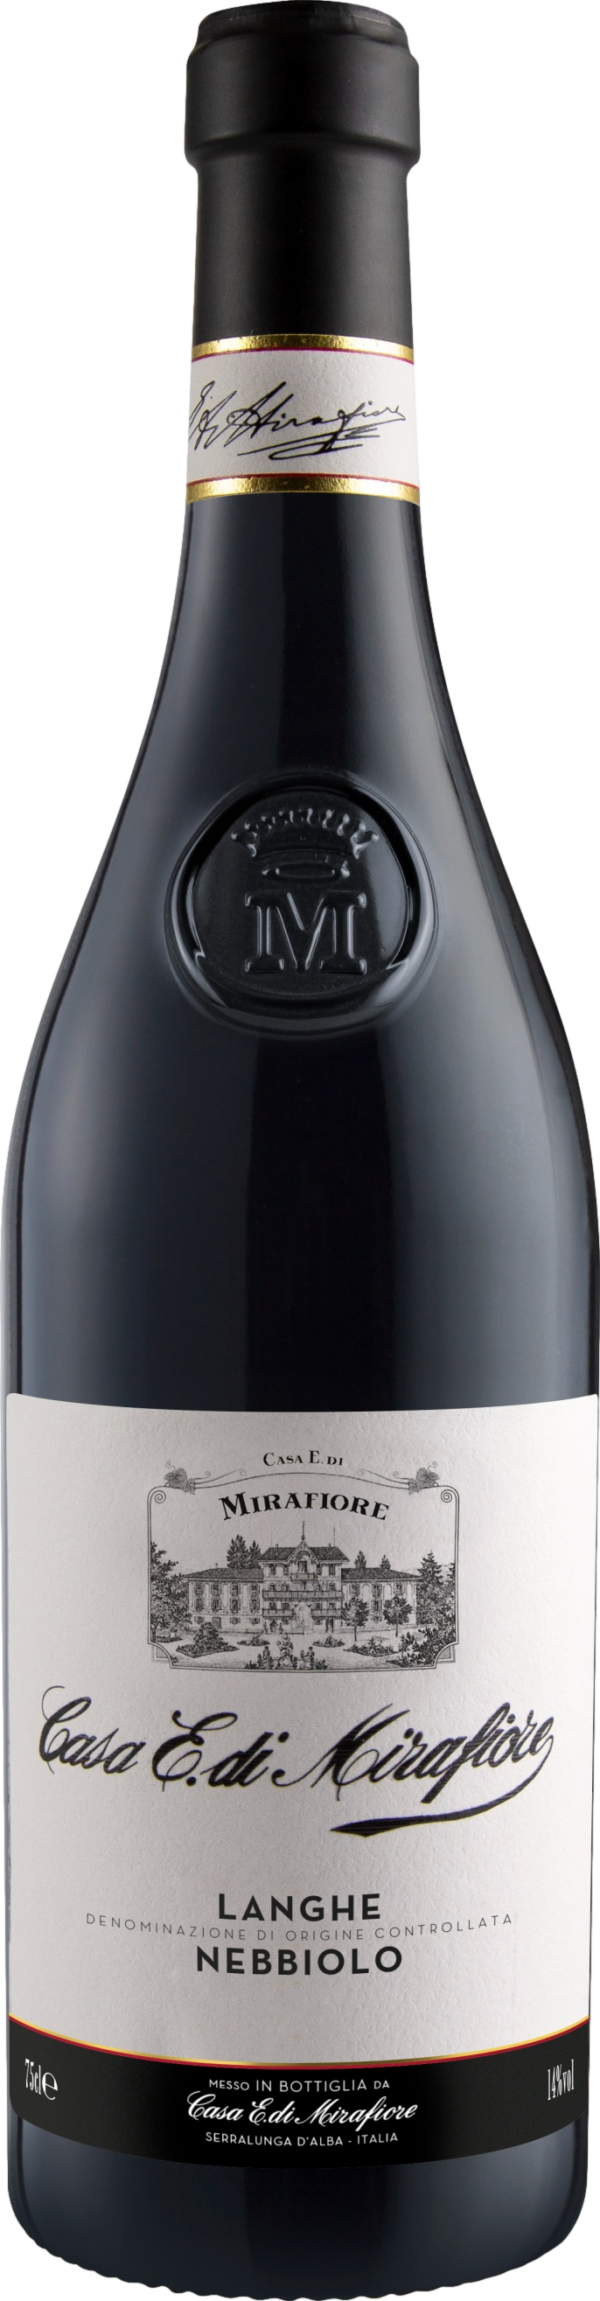 Product image of Mirafiore Langhe Nebbiolo 2020 from 8wines